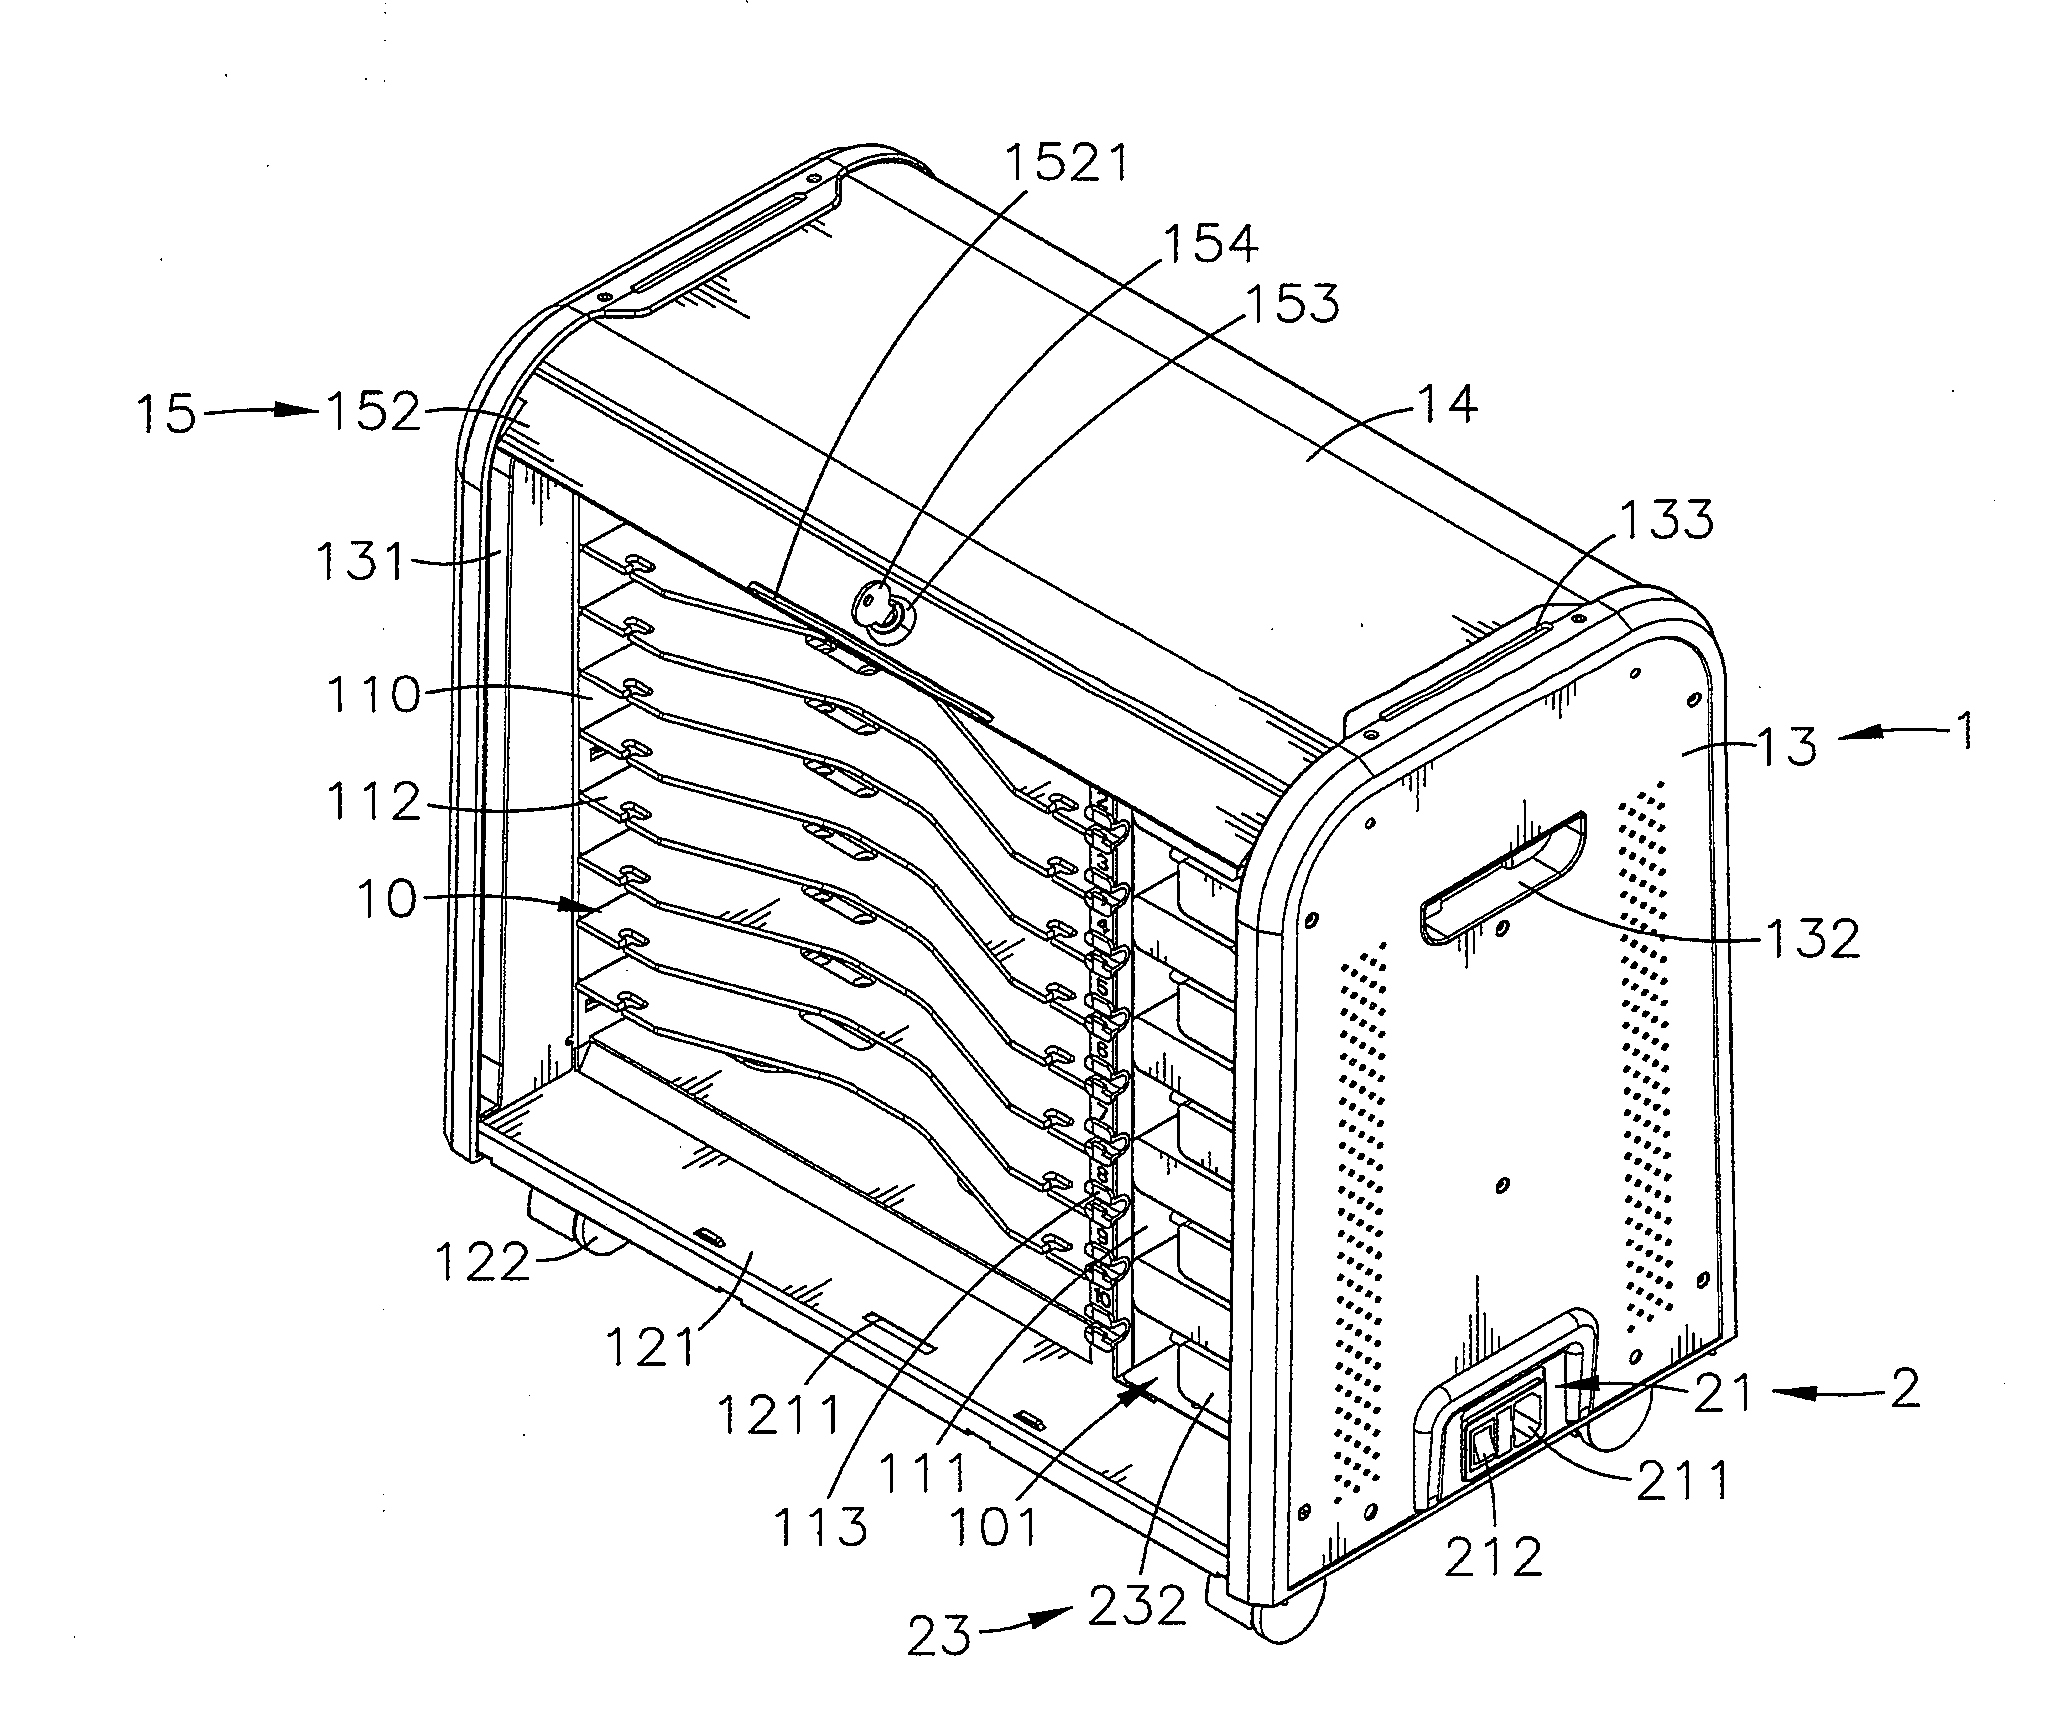 Mobile electronic device storage and charging cabinet